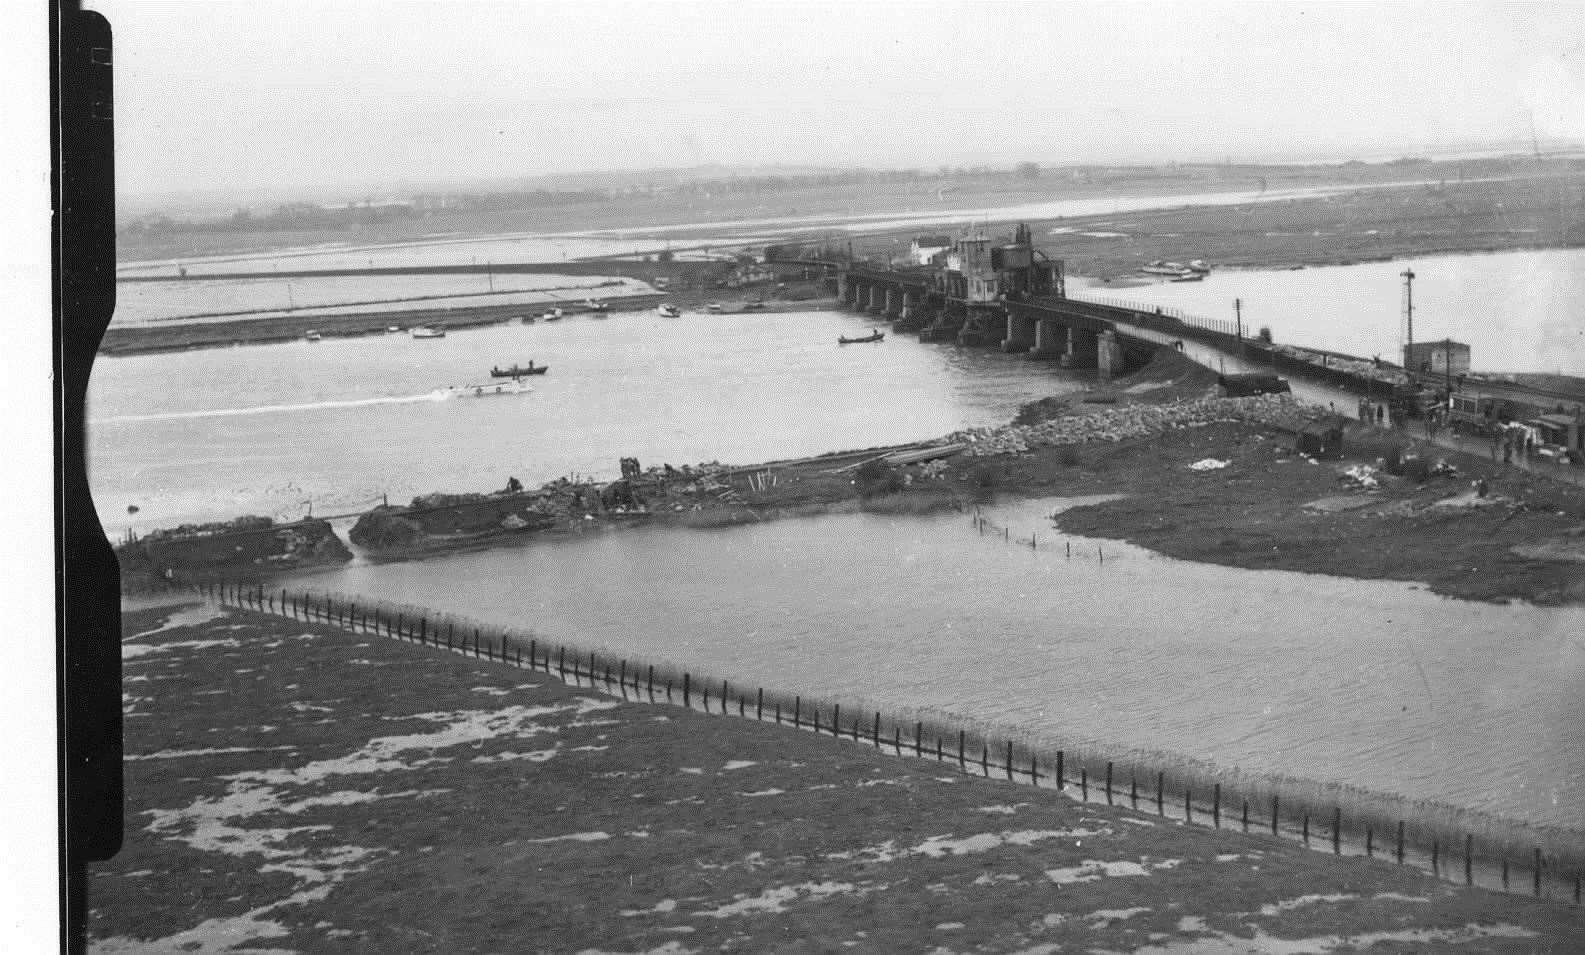 An aerial View of Kingsferry Bridge shortly after the flooding